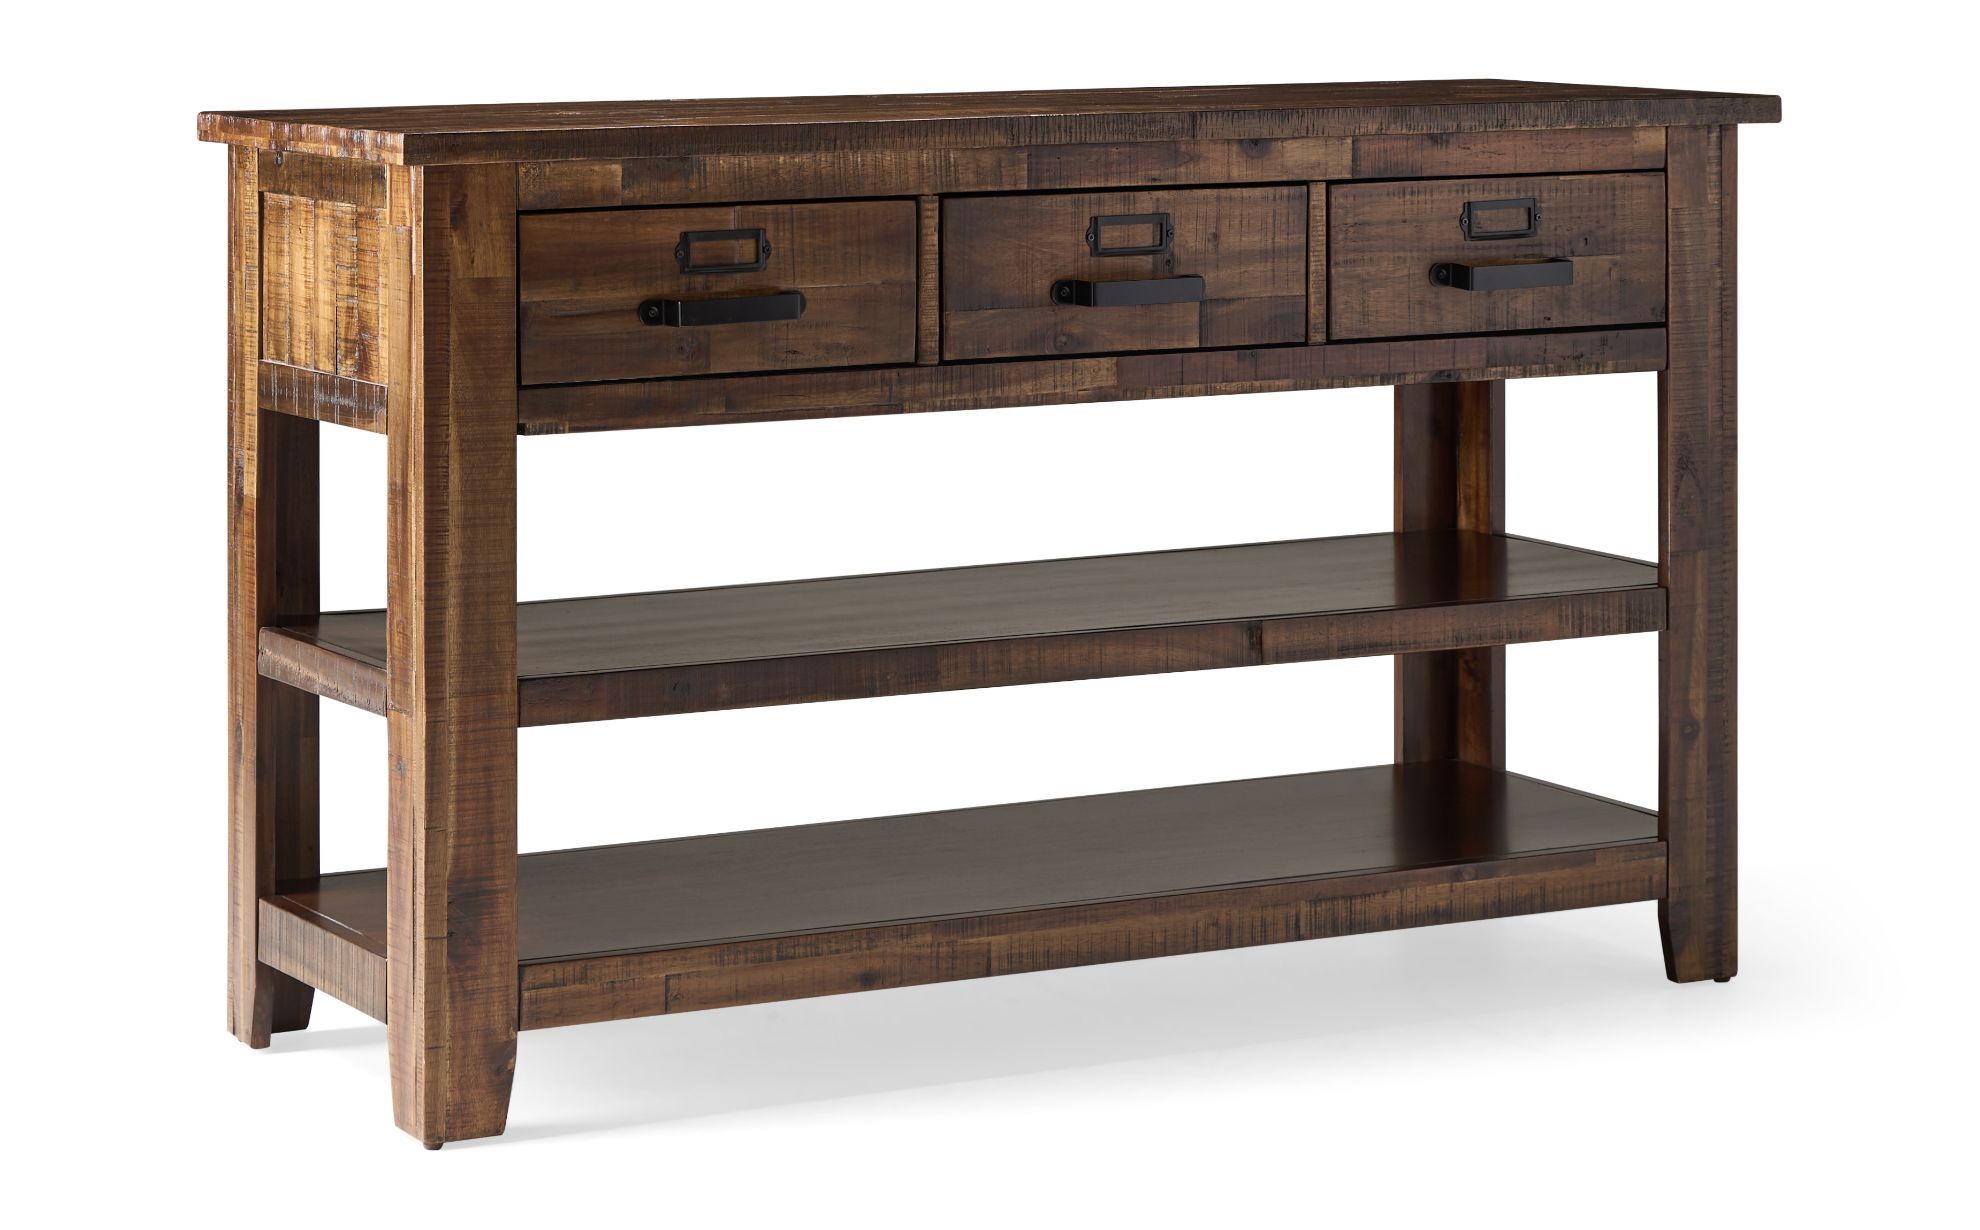 Cannon Valley Sofa Table